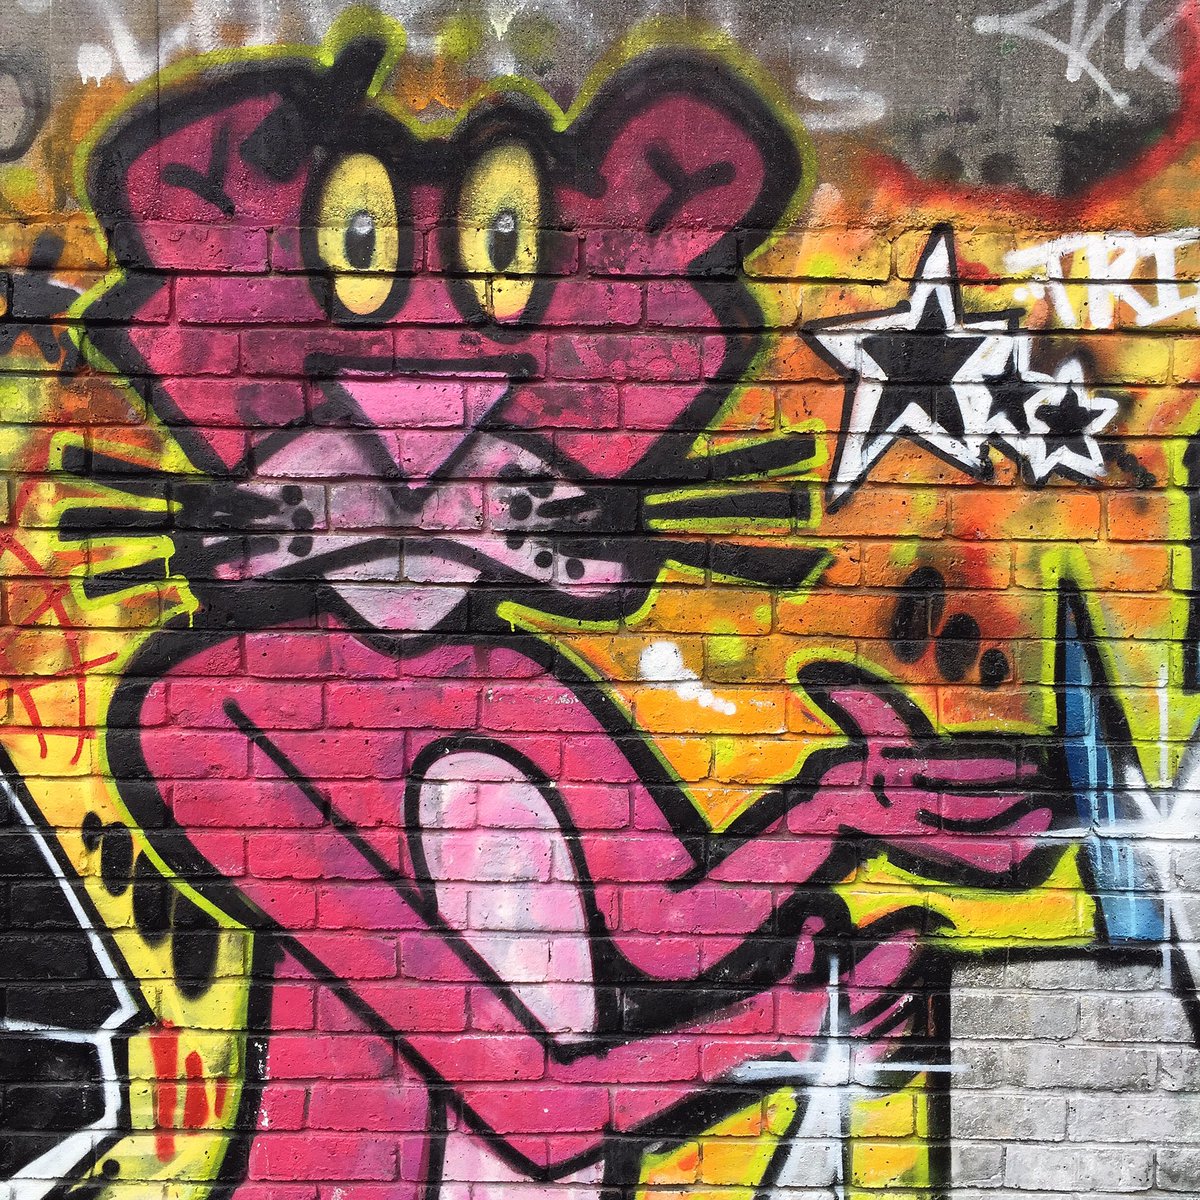 “Well he’s the one and only Truly Original panther pink from head to toe 🎶” #LondonWalking #PinkPanther #RegentsCanal #StreetArt